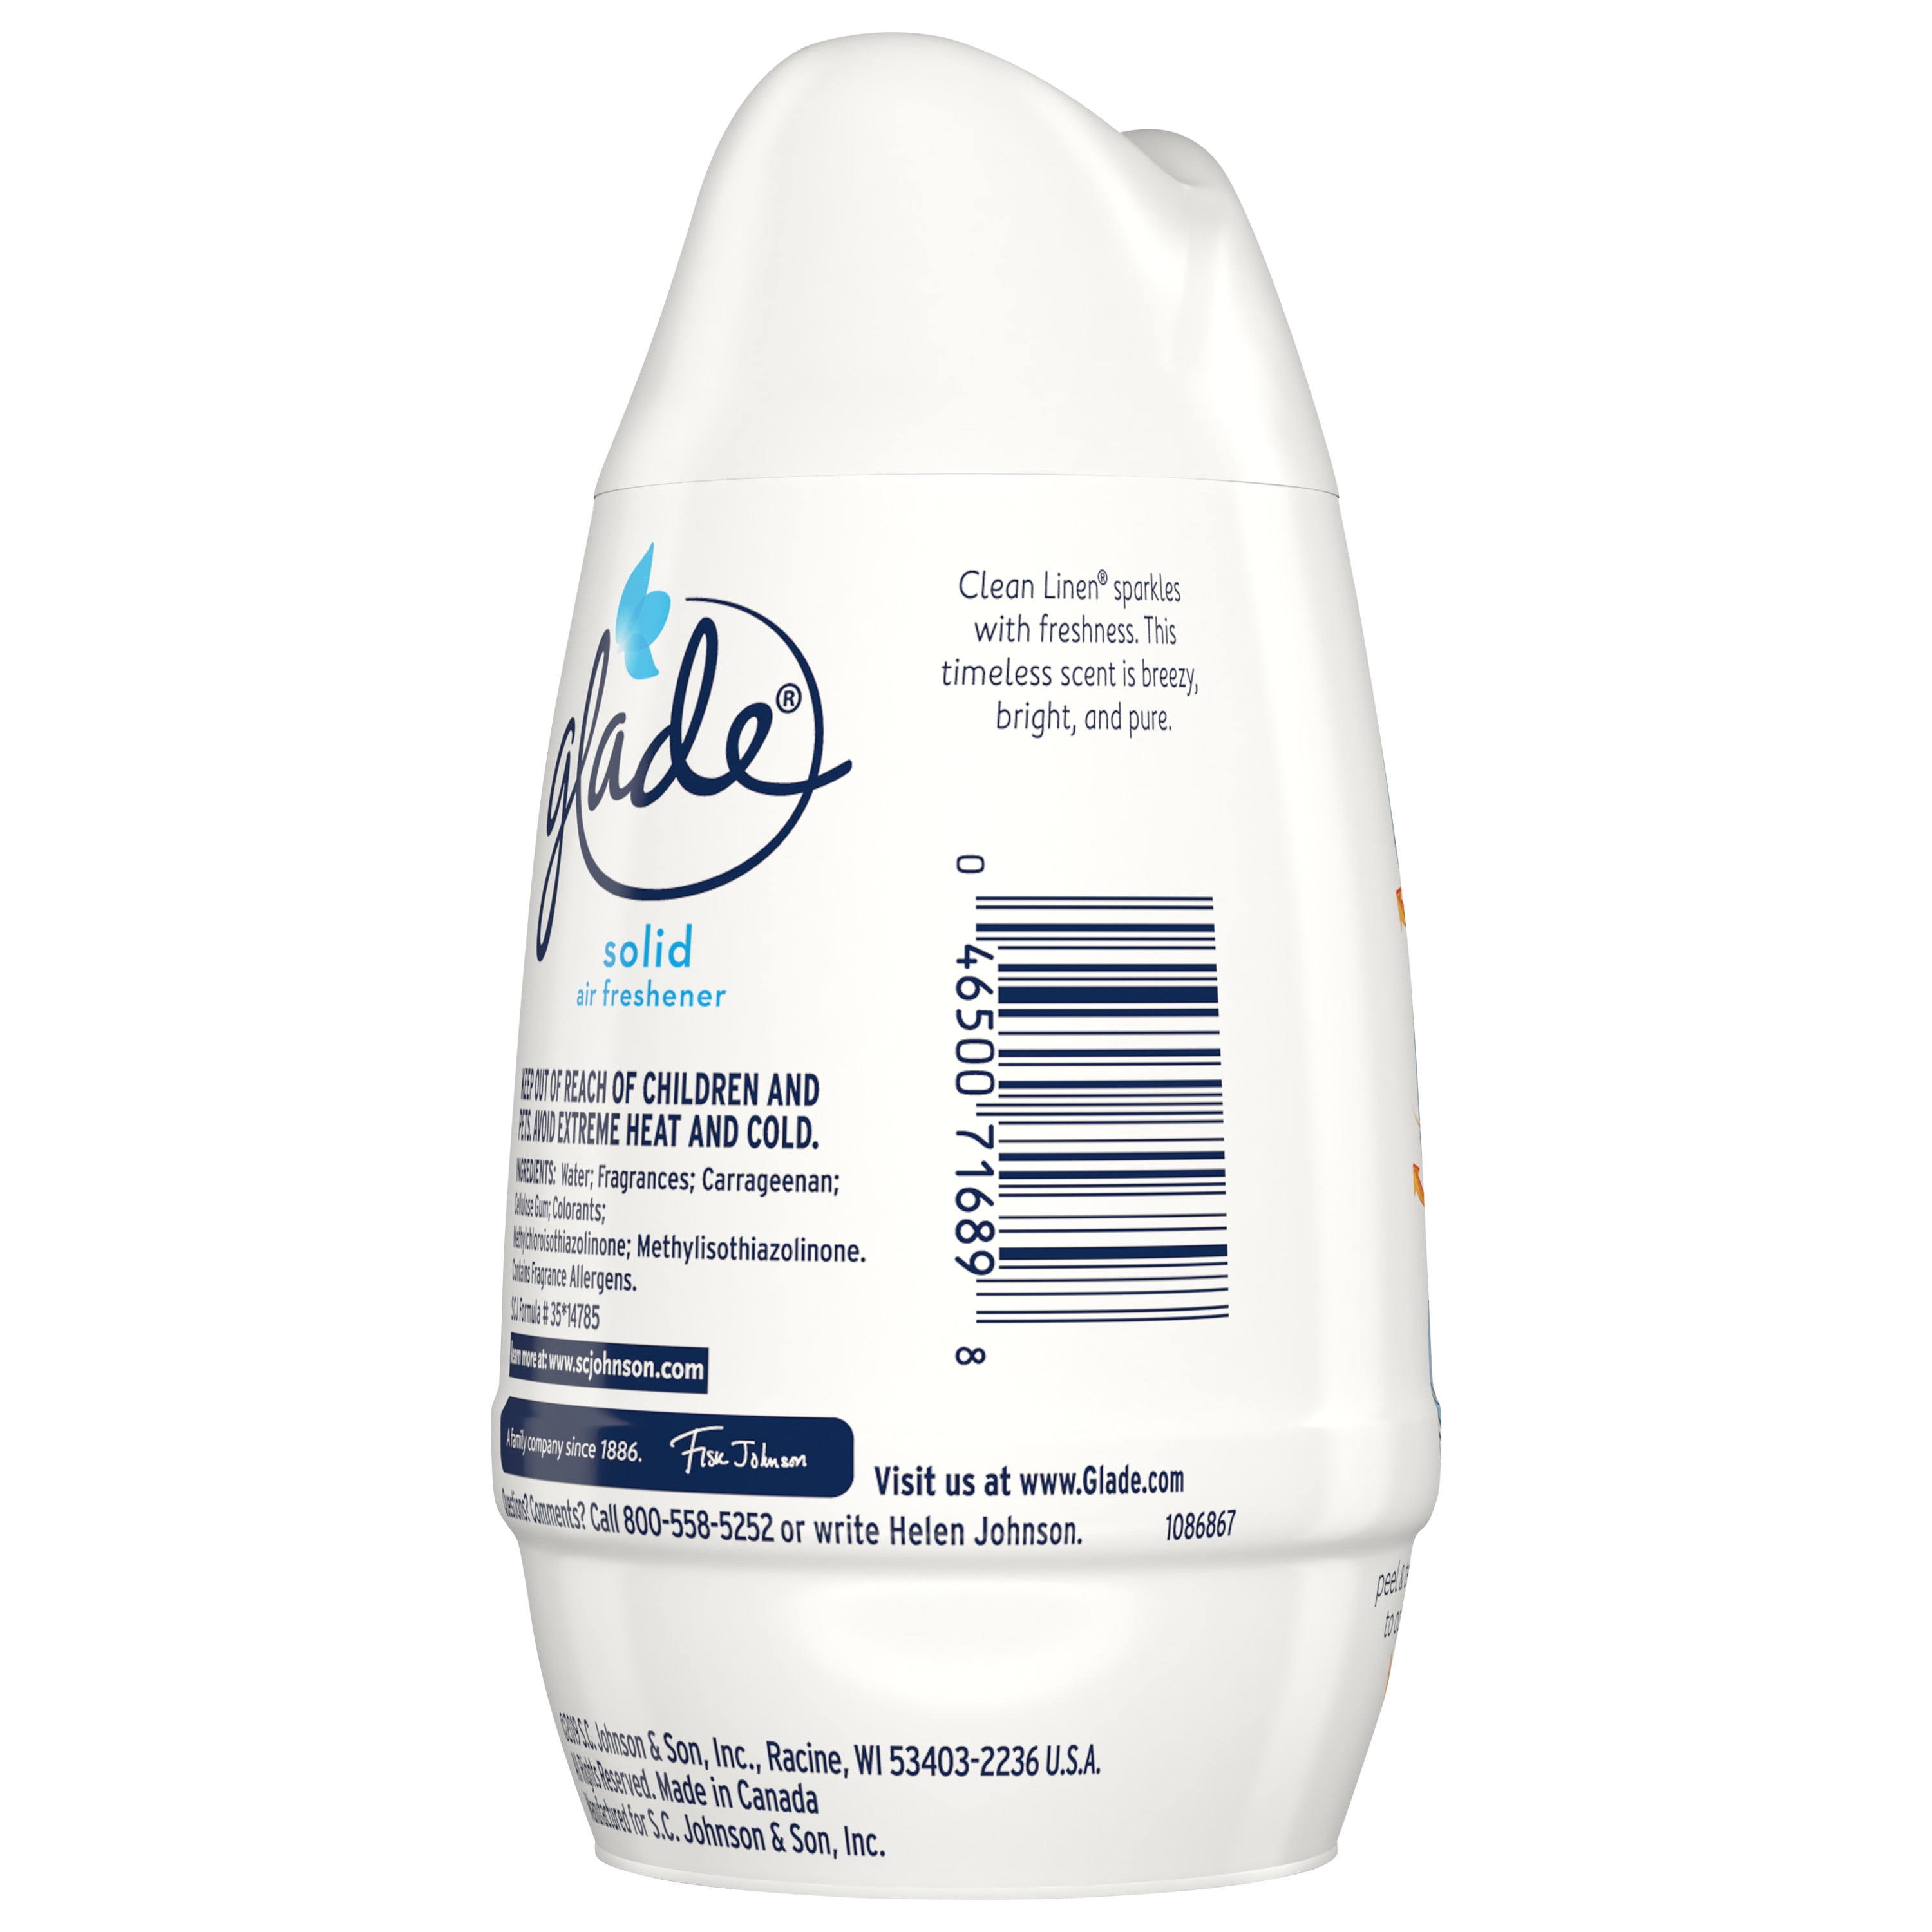 Glade Solid Air Freshener 1 CT, Clean Linen, 6 OZ. Total 